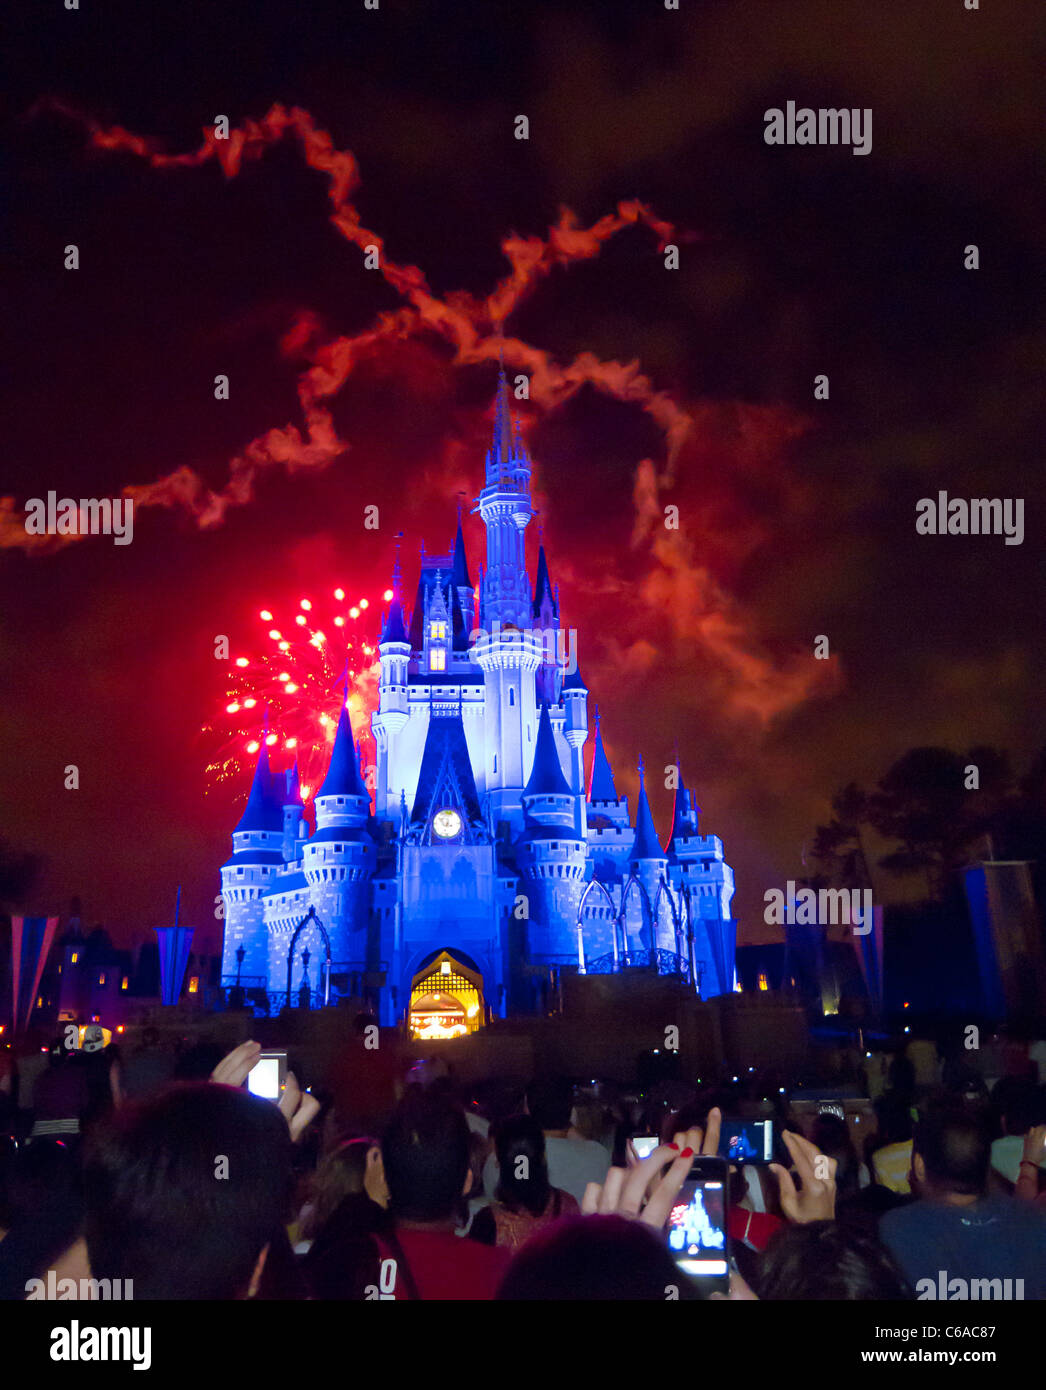 Fireworks explode over Cinderella's Castle in Magic Kingdom, Disney World, FL, while light show plays across castle's walls Stock Photo